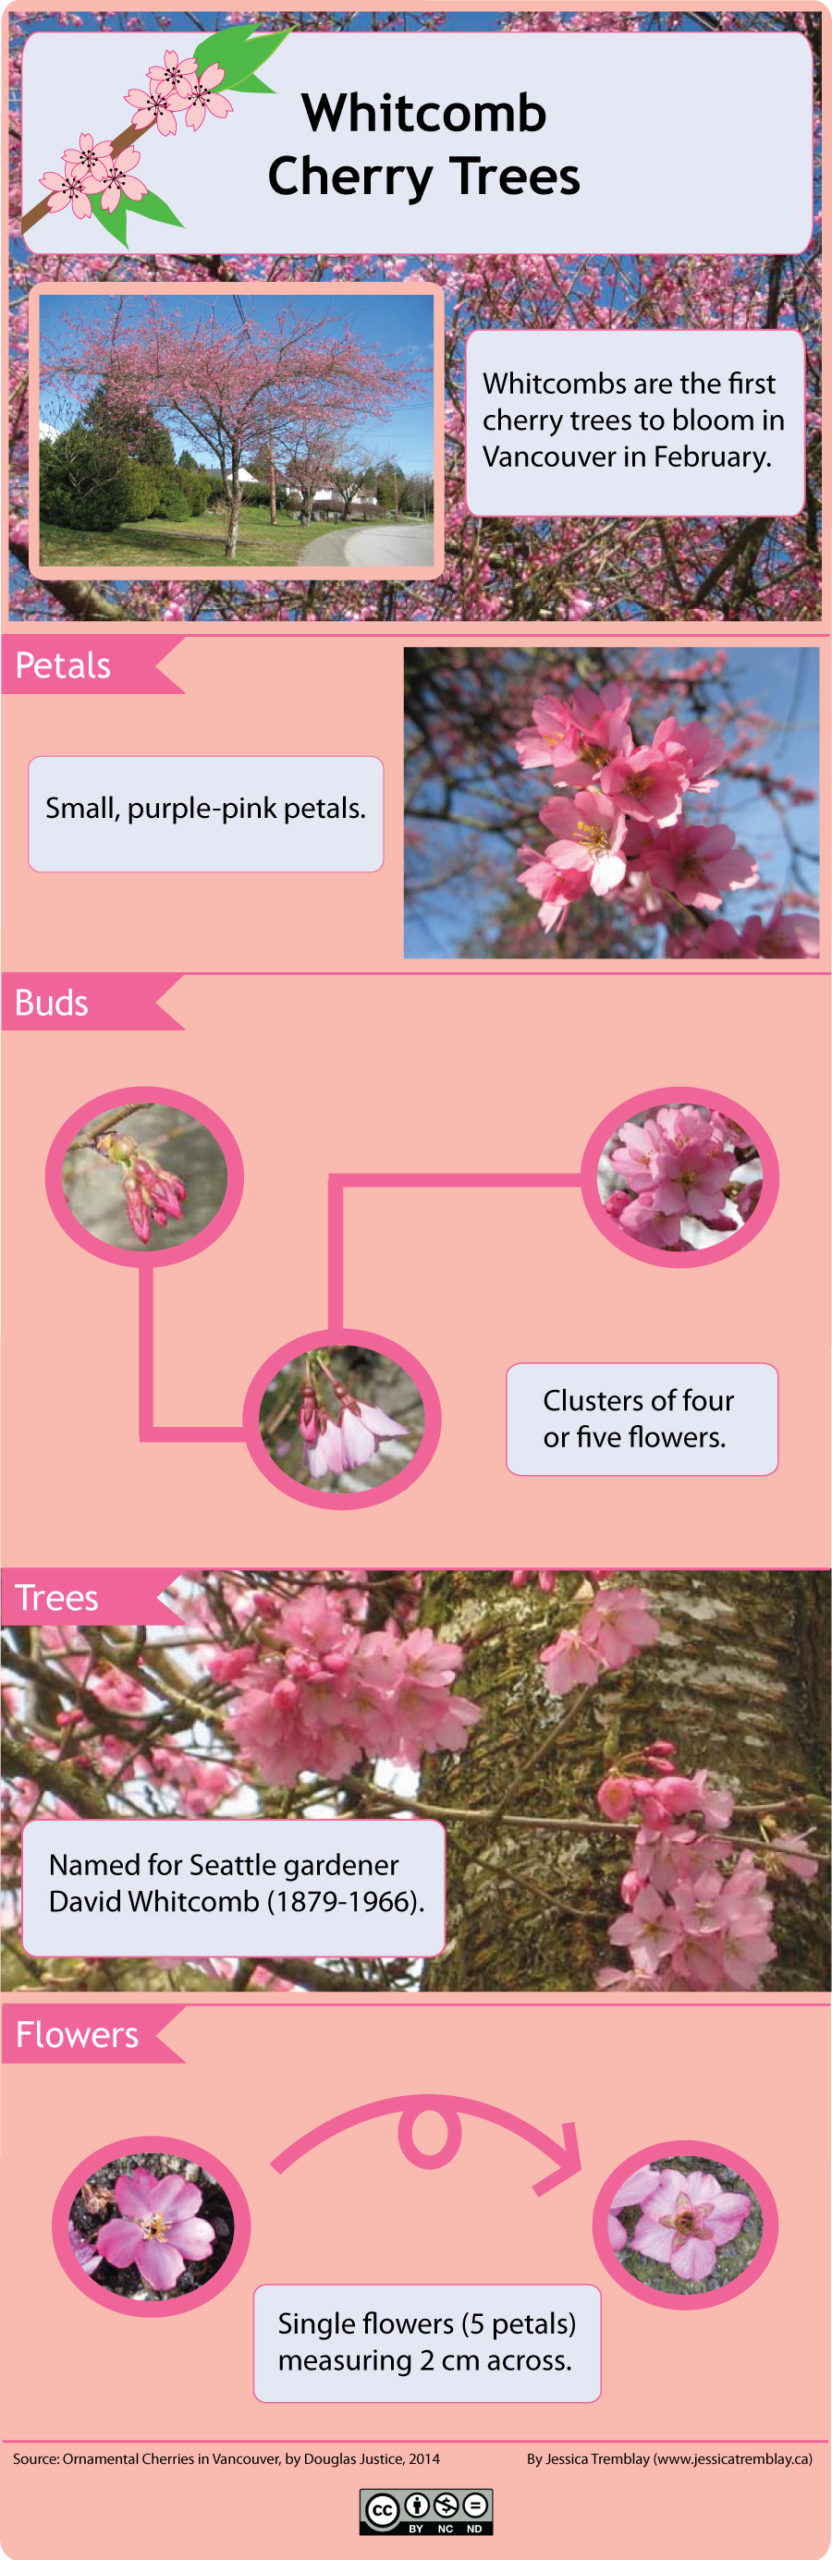 Whitcomb cherry trees identification guide (infographic)